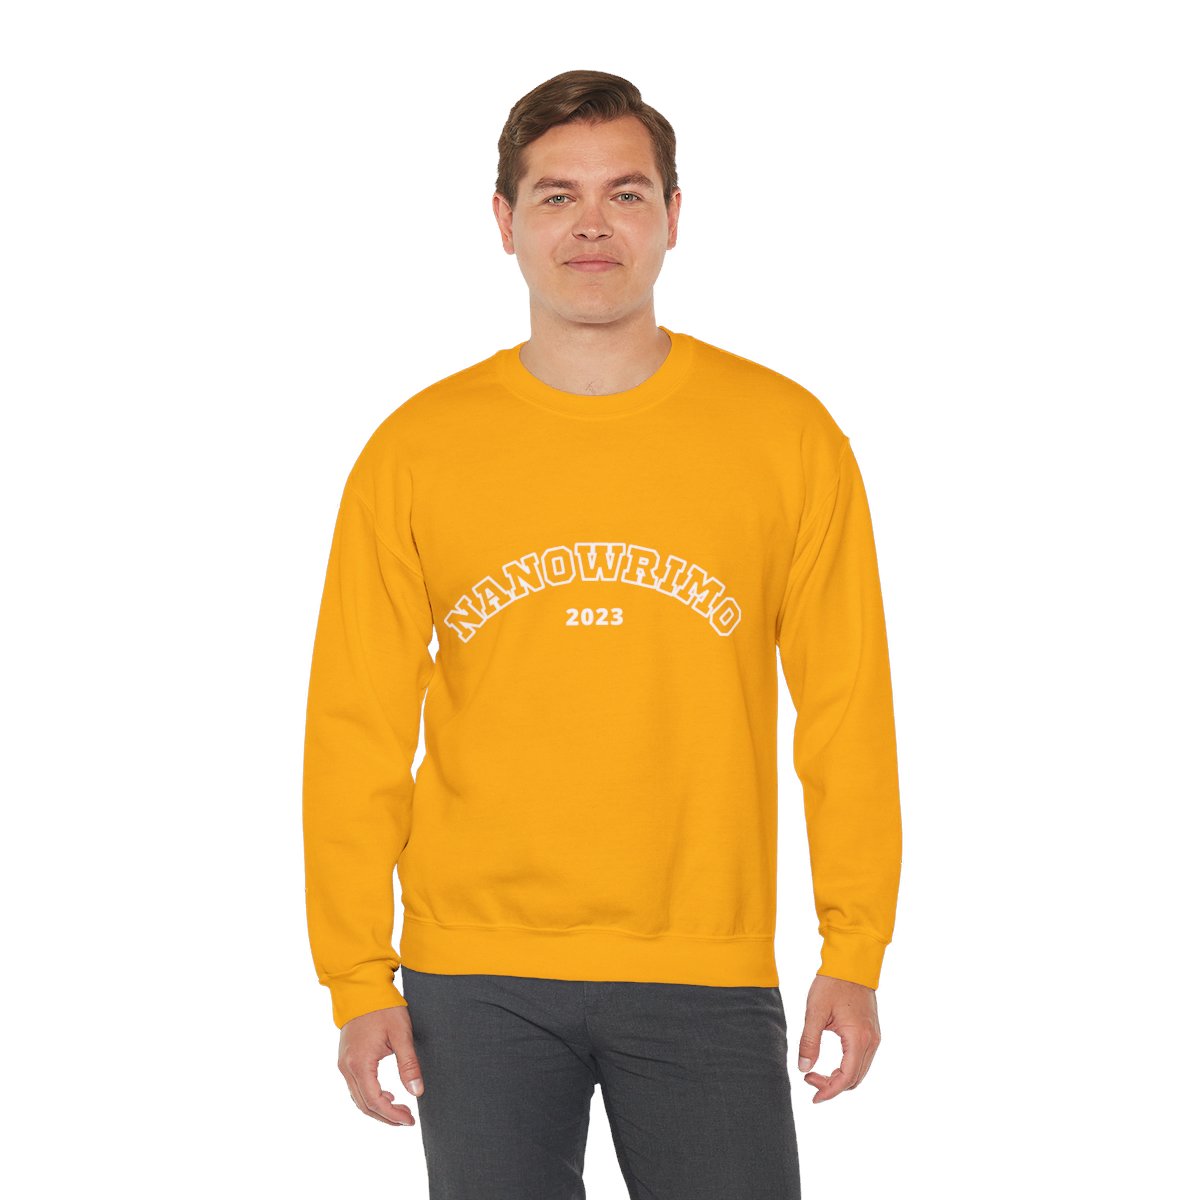 NaNoWriMo 2023 Unisex Crewneck Sweatshirt for Writers and Authors doing the NaNoWriMo Challenge in 2023 product thumbnail image